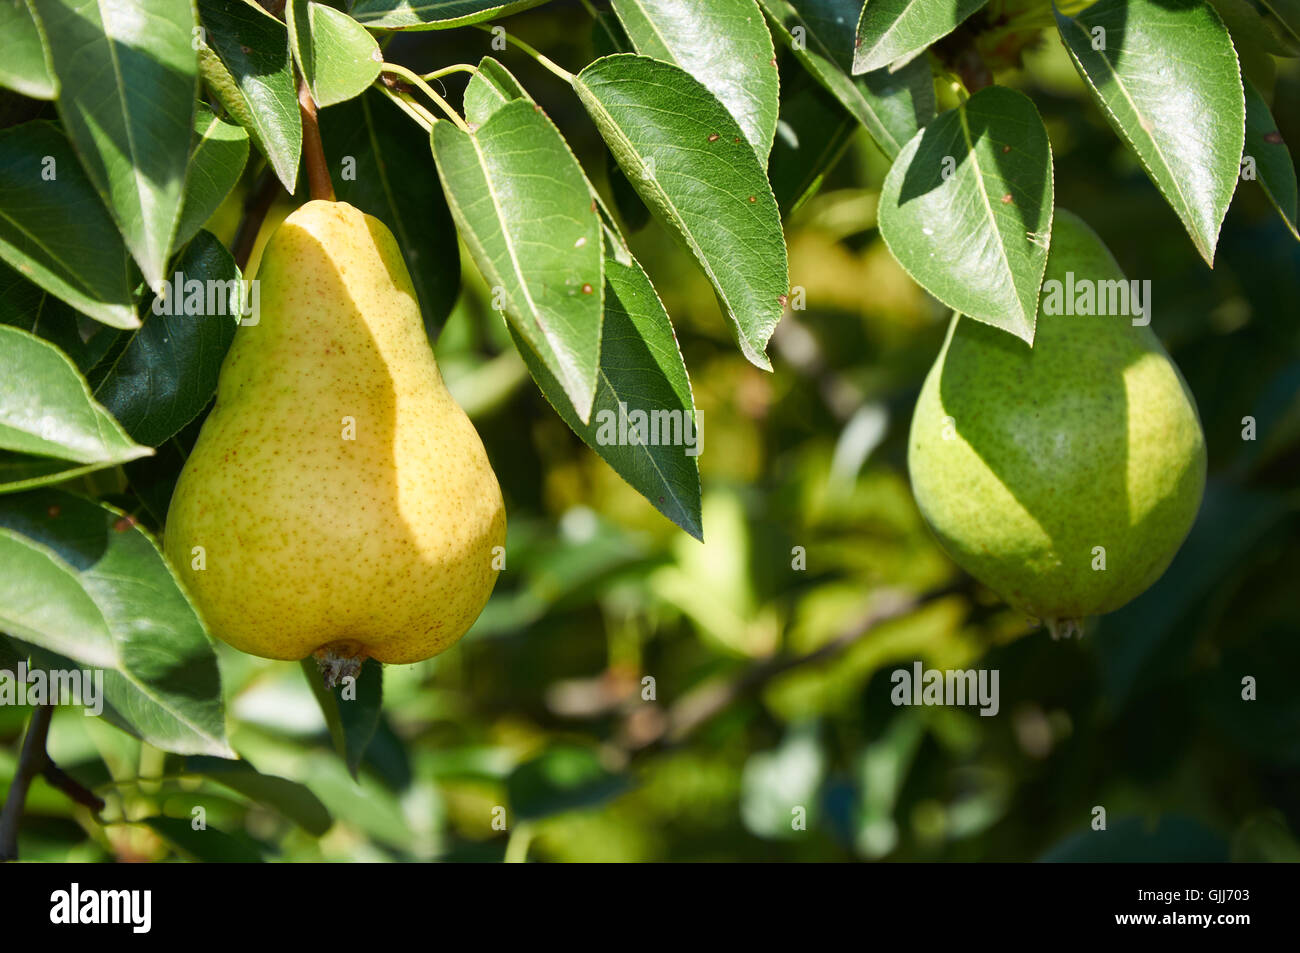 Yellow and green  fruits on the branch of pear tree Stock Photo